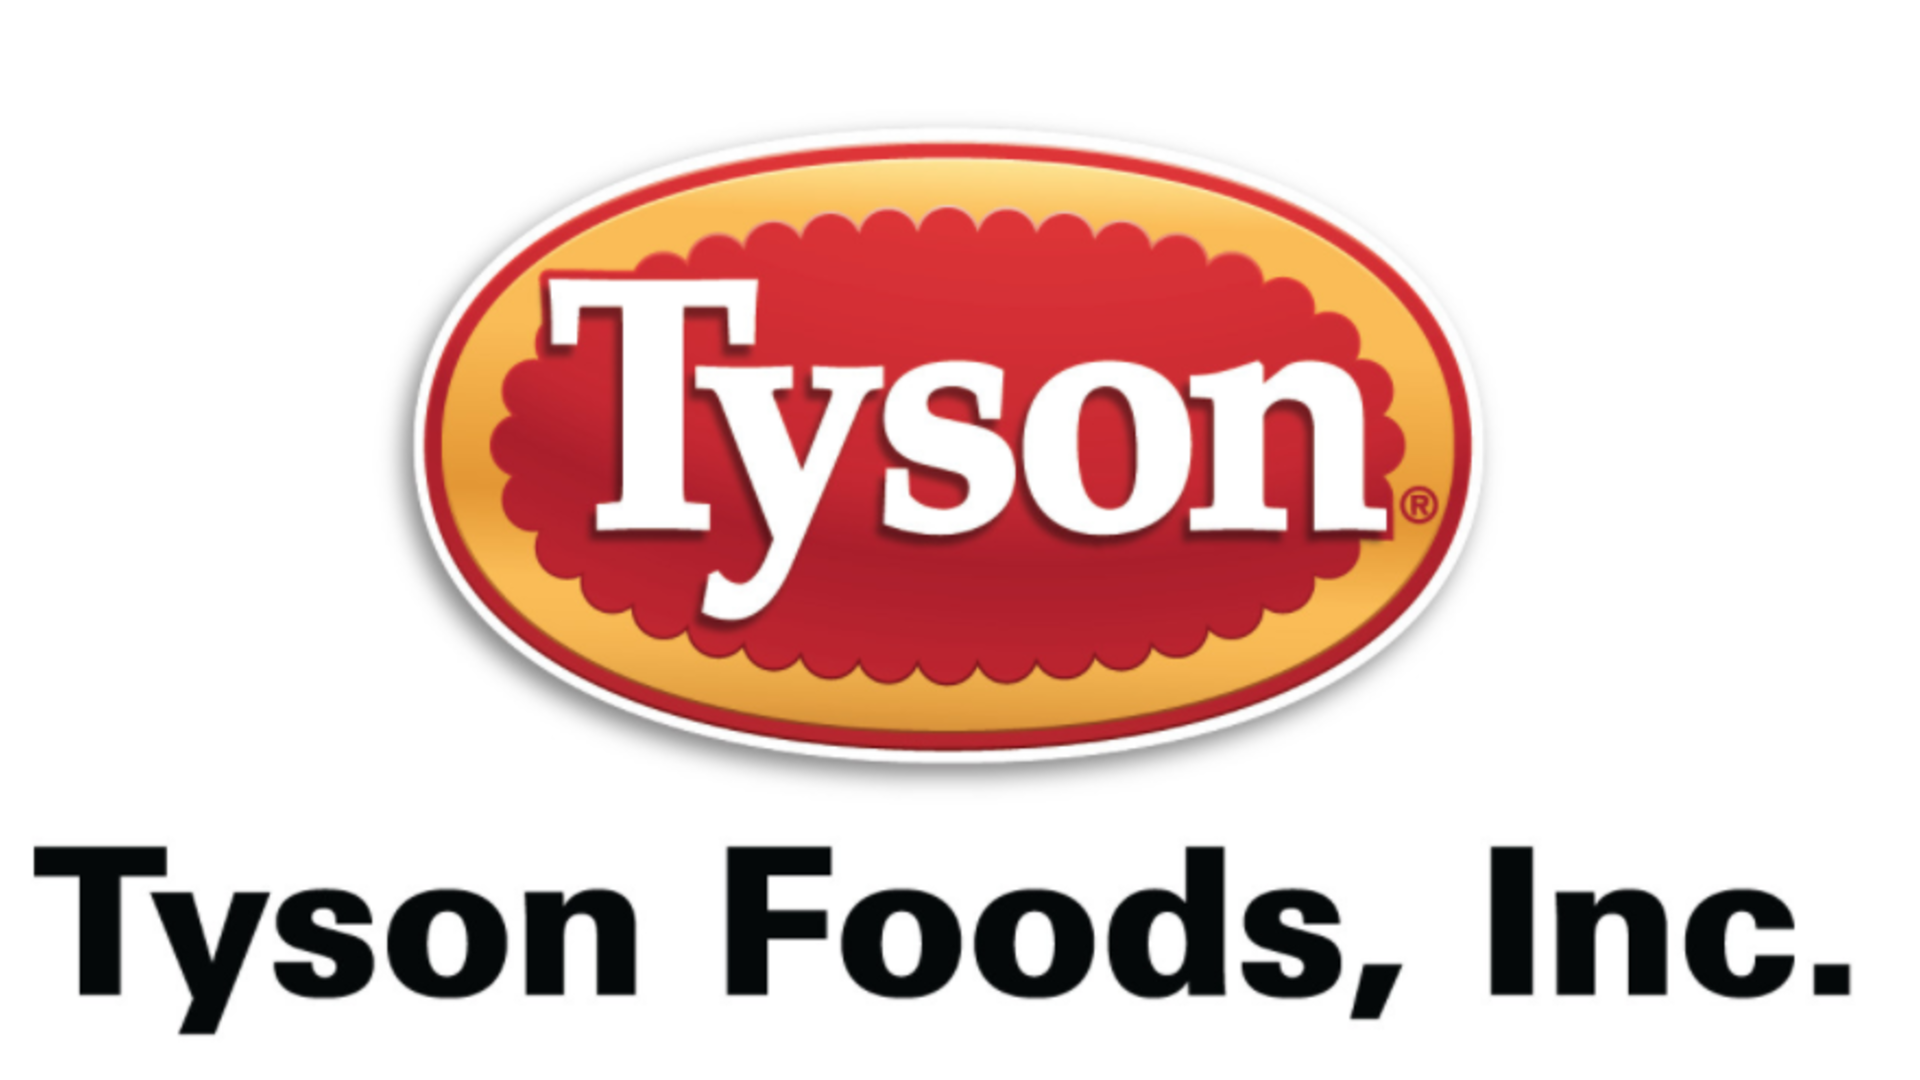 Tyson to Add $5 to Cash Cattle Prices in Wake of COVID-19